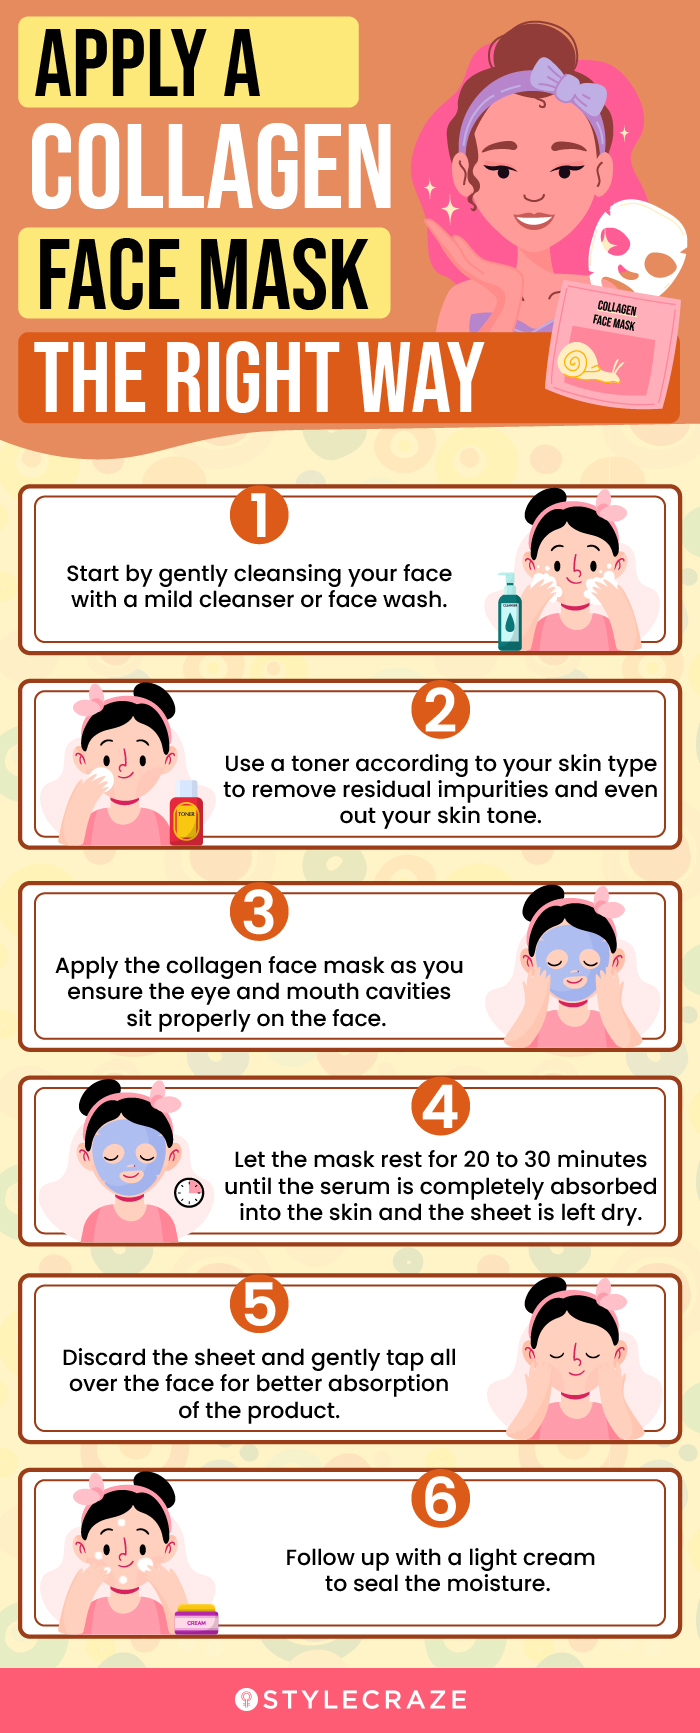 Apply A Collagen Face Mask The Right Way (infographic)